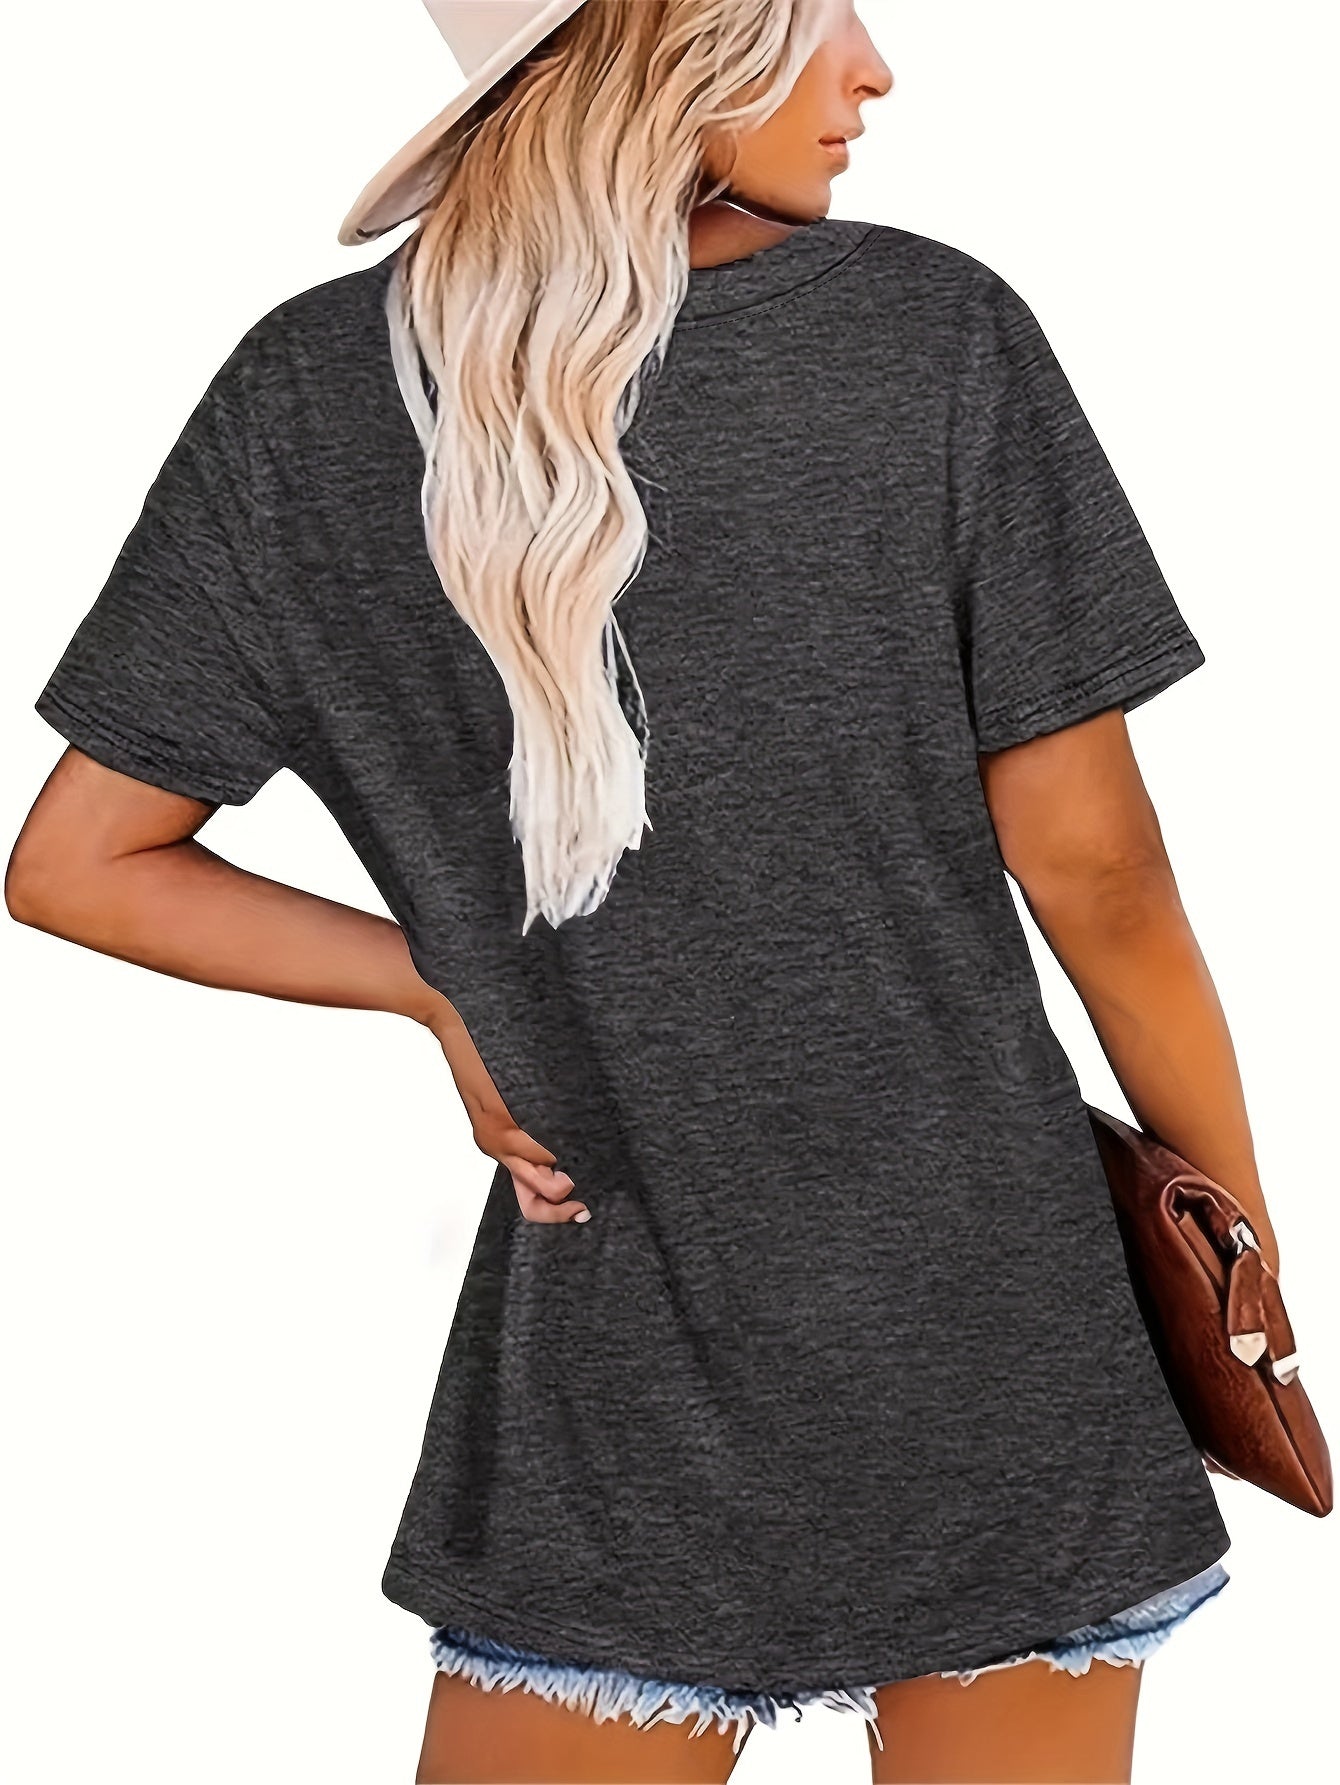 Guitar Print Crew Neck T-shirt, Casual Short Sleeve Top For Spring & Summer, Women's Clothing